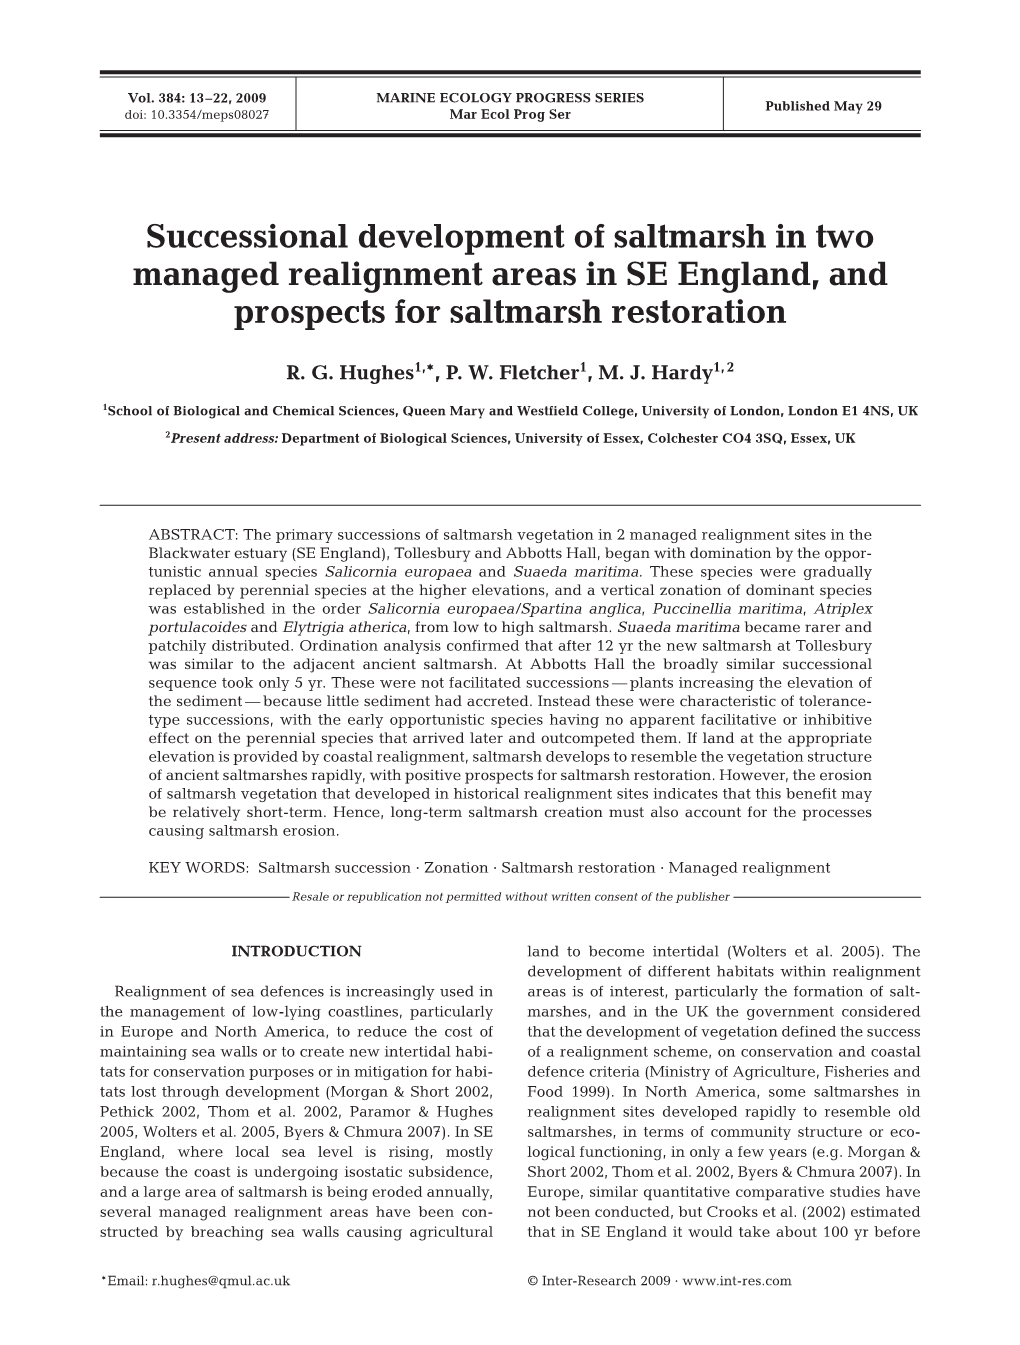 Successional Development of Saltmarsh in Two Managed Realignment Areas in SE England, and Prospects for Saltmarsh Restoration